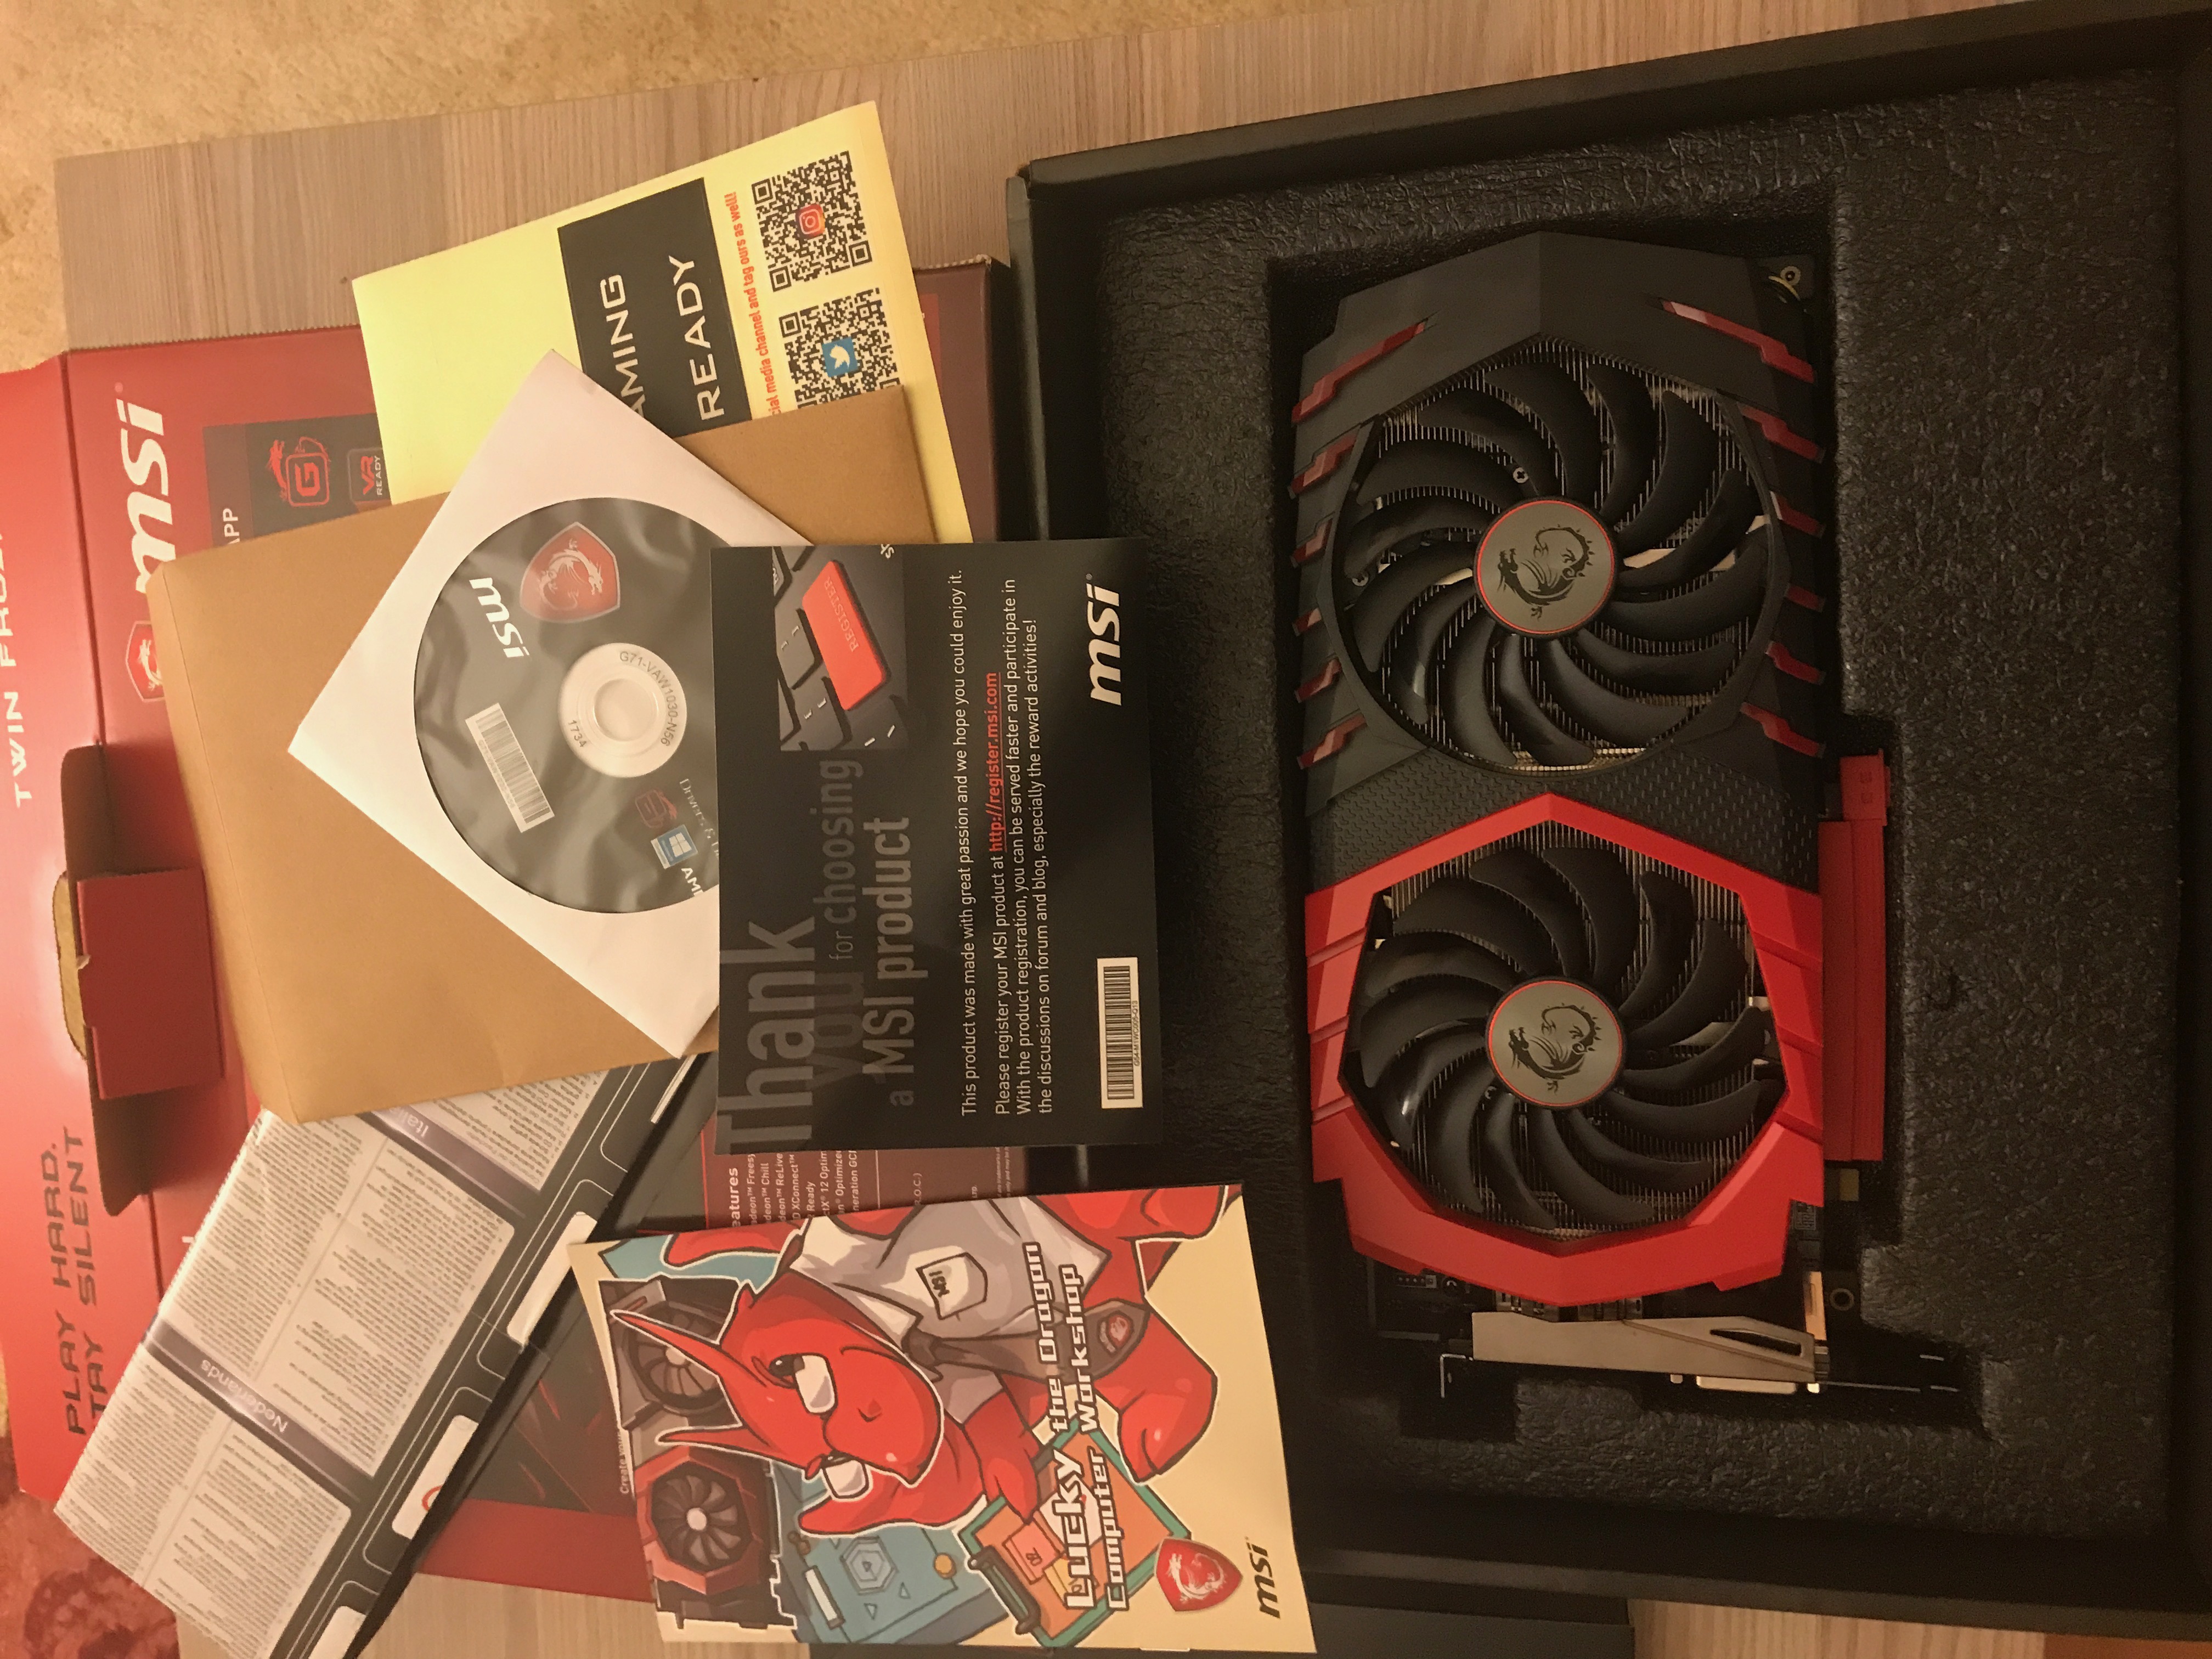 Rx580 Gaming x в руке.